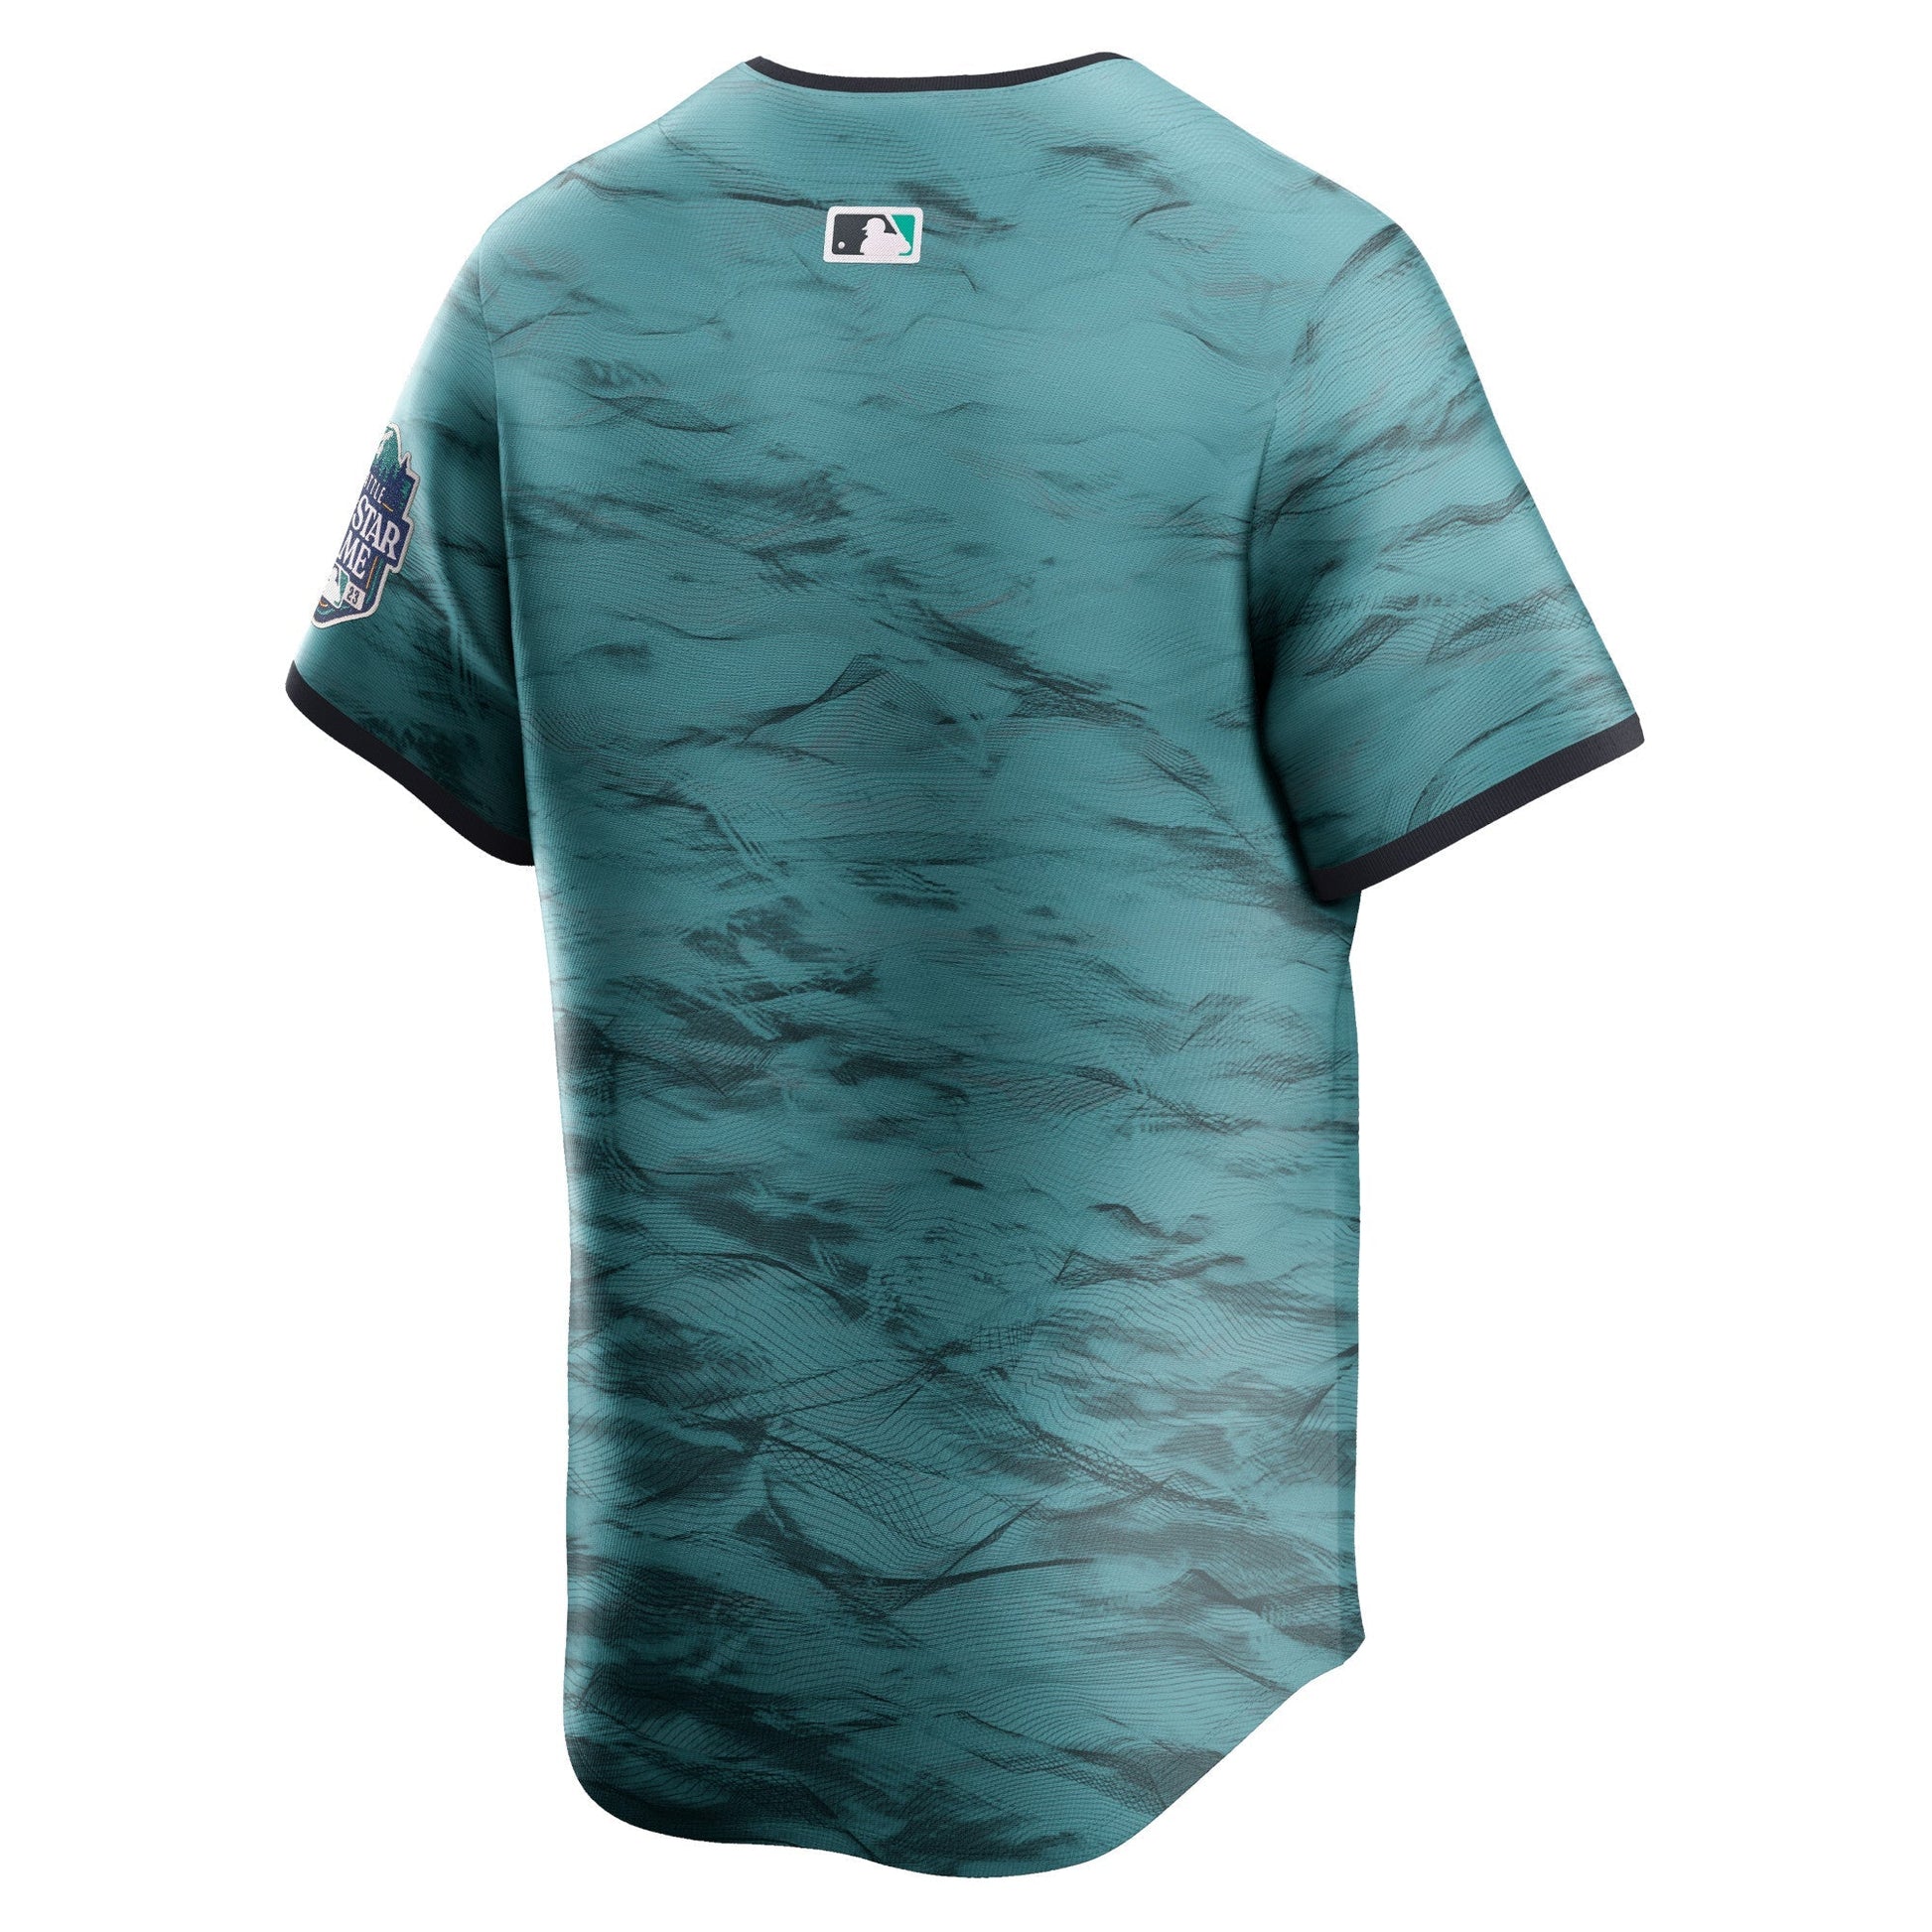 Men's American League Nike Teal 2023 MLB All-Star Game Limited Jersey